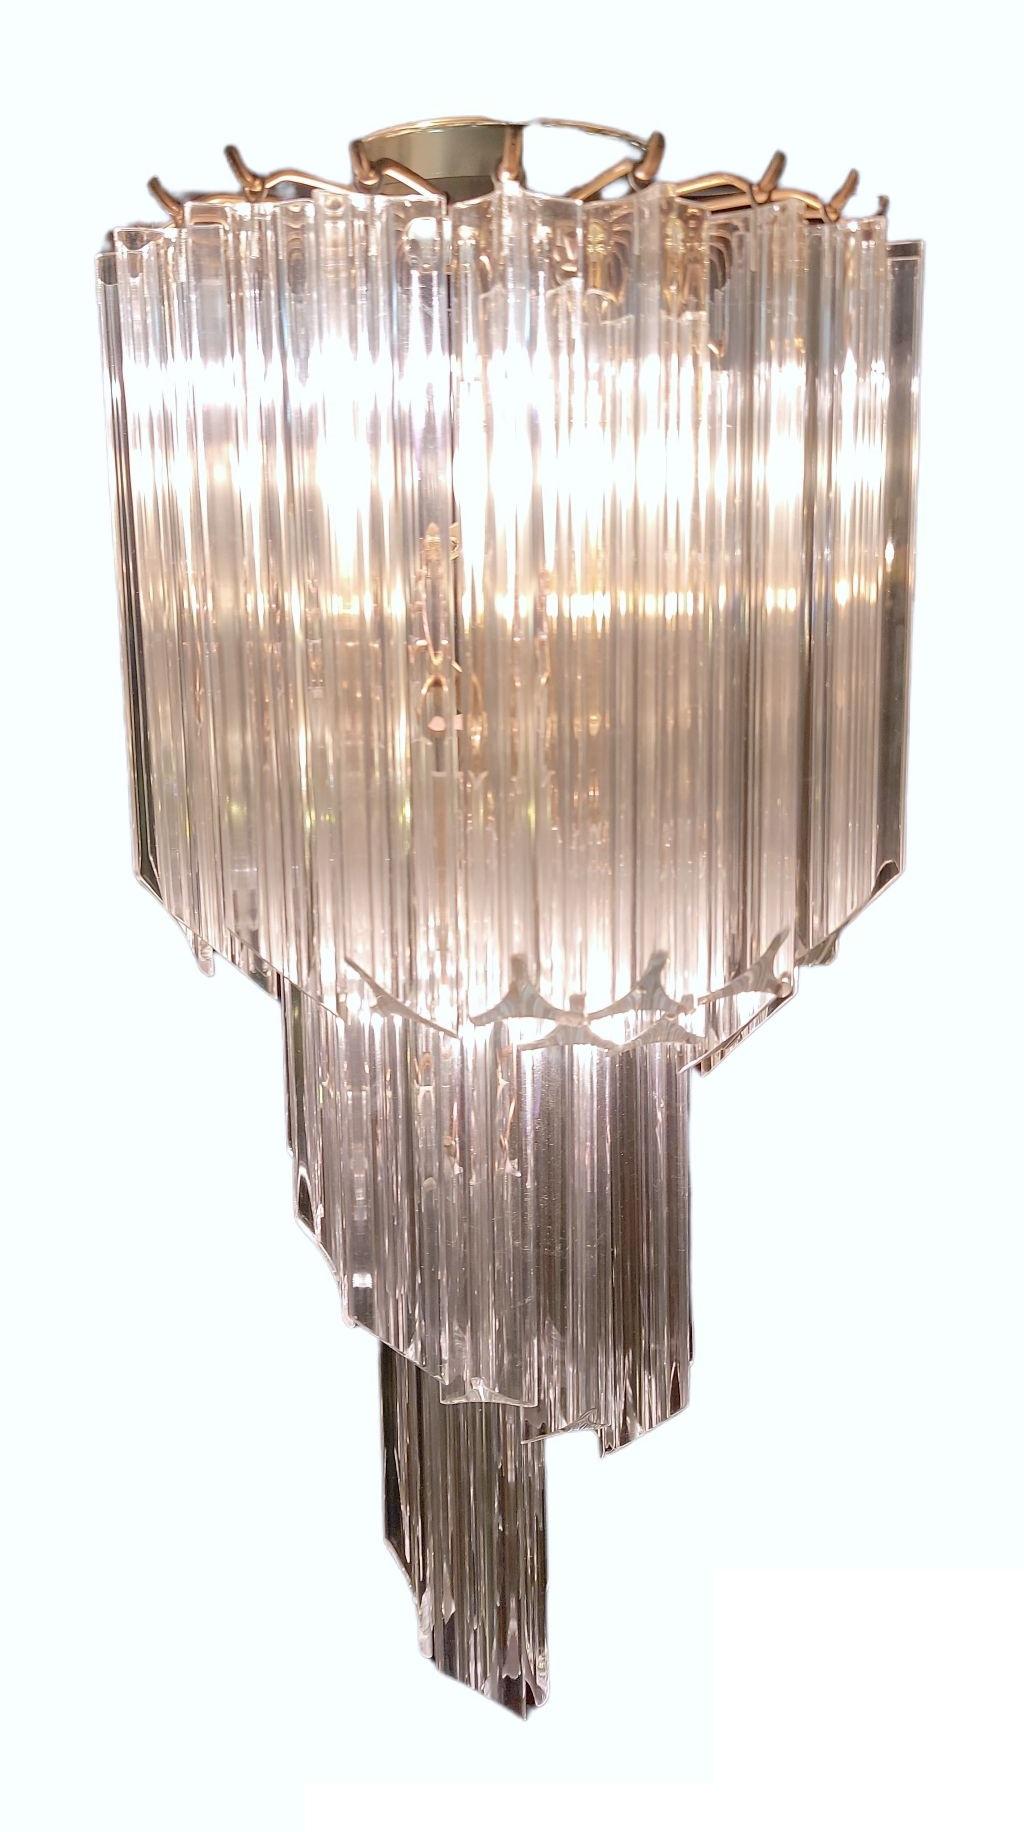 Italian 1970s Mid-Century Modern Lucite Swirl Waterfall Design Chandeliers, a Pair For Sale